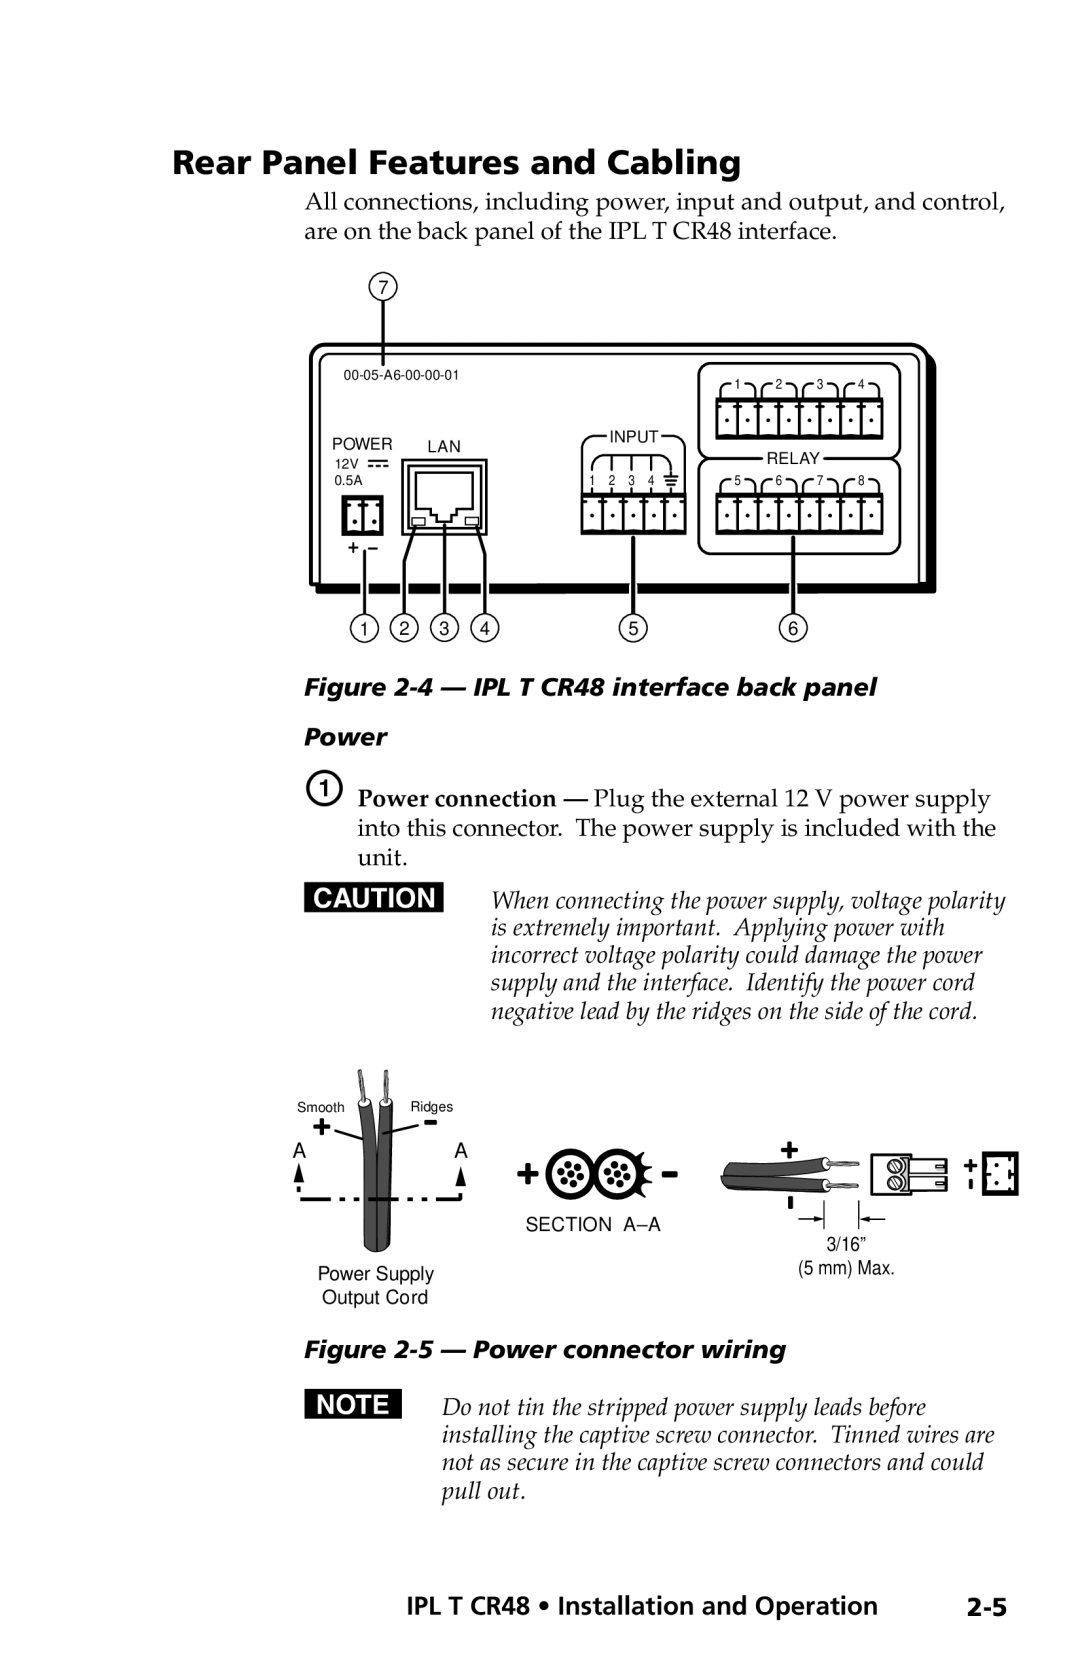 Extron electronic Rear Panel Features and Cabling, IPL T CR48 Installation and Operation, 5 - Power connector wiring 